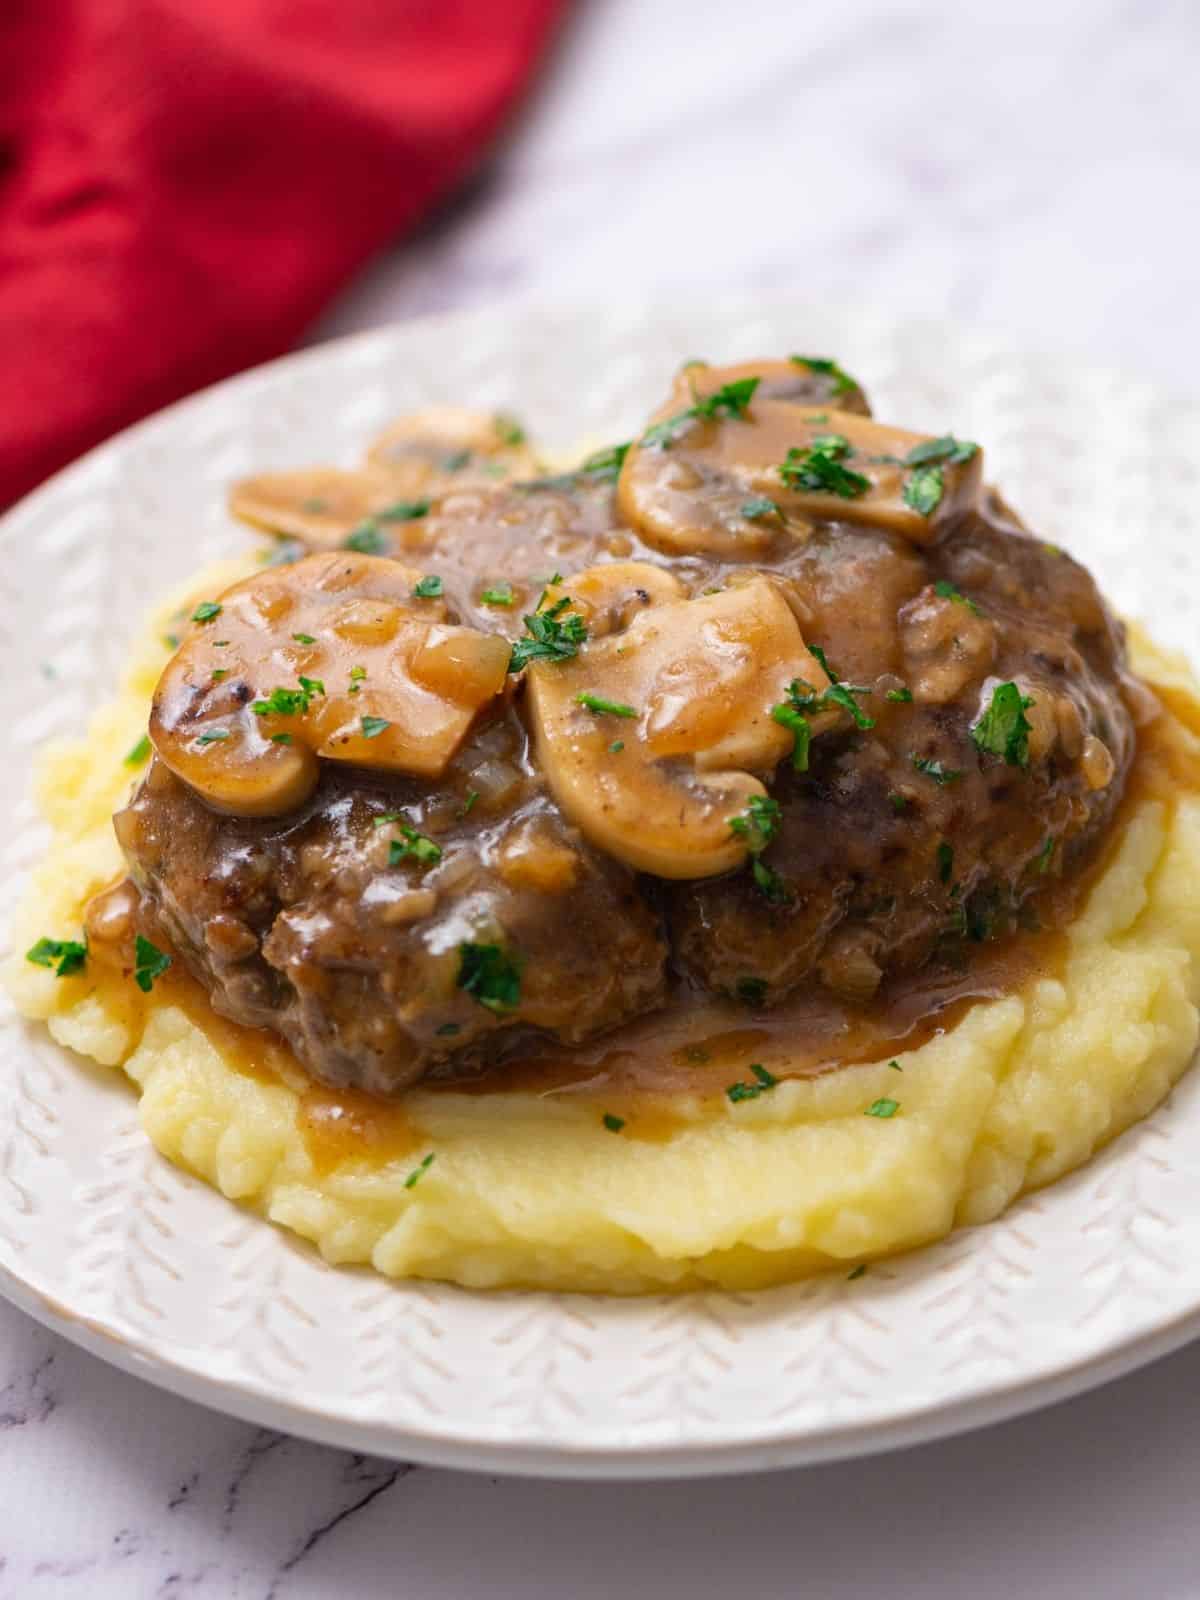 Chopped Steak with mushroom gravy served over mashed potatoes on white plate.